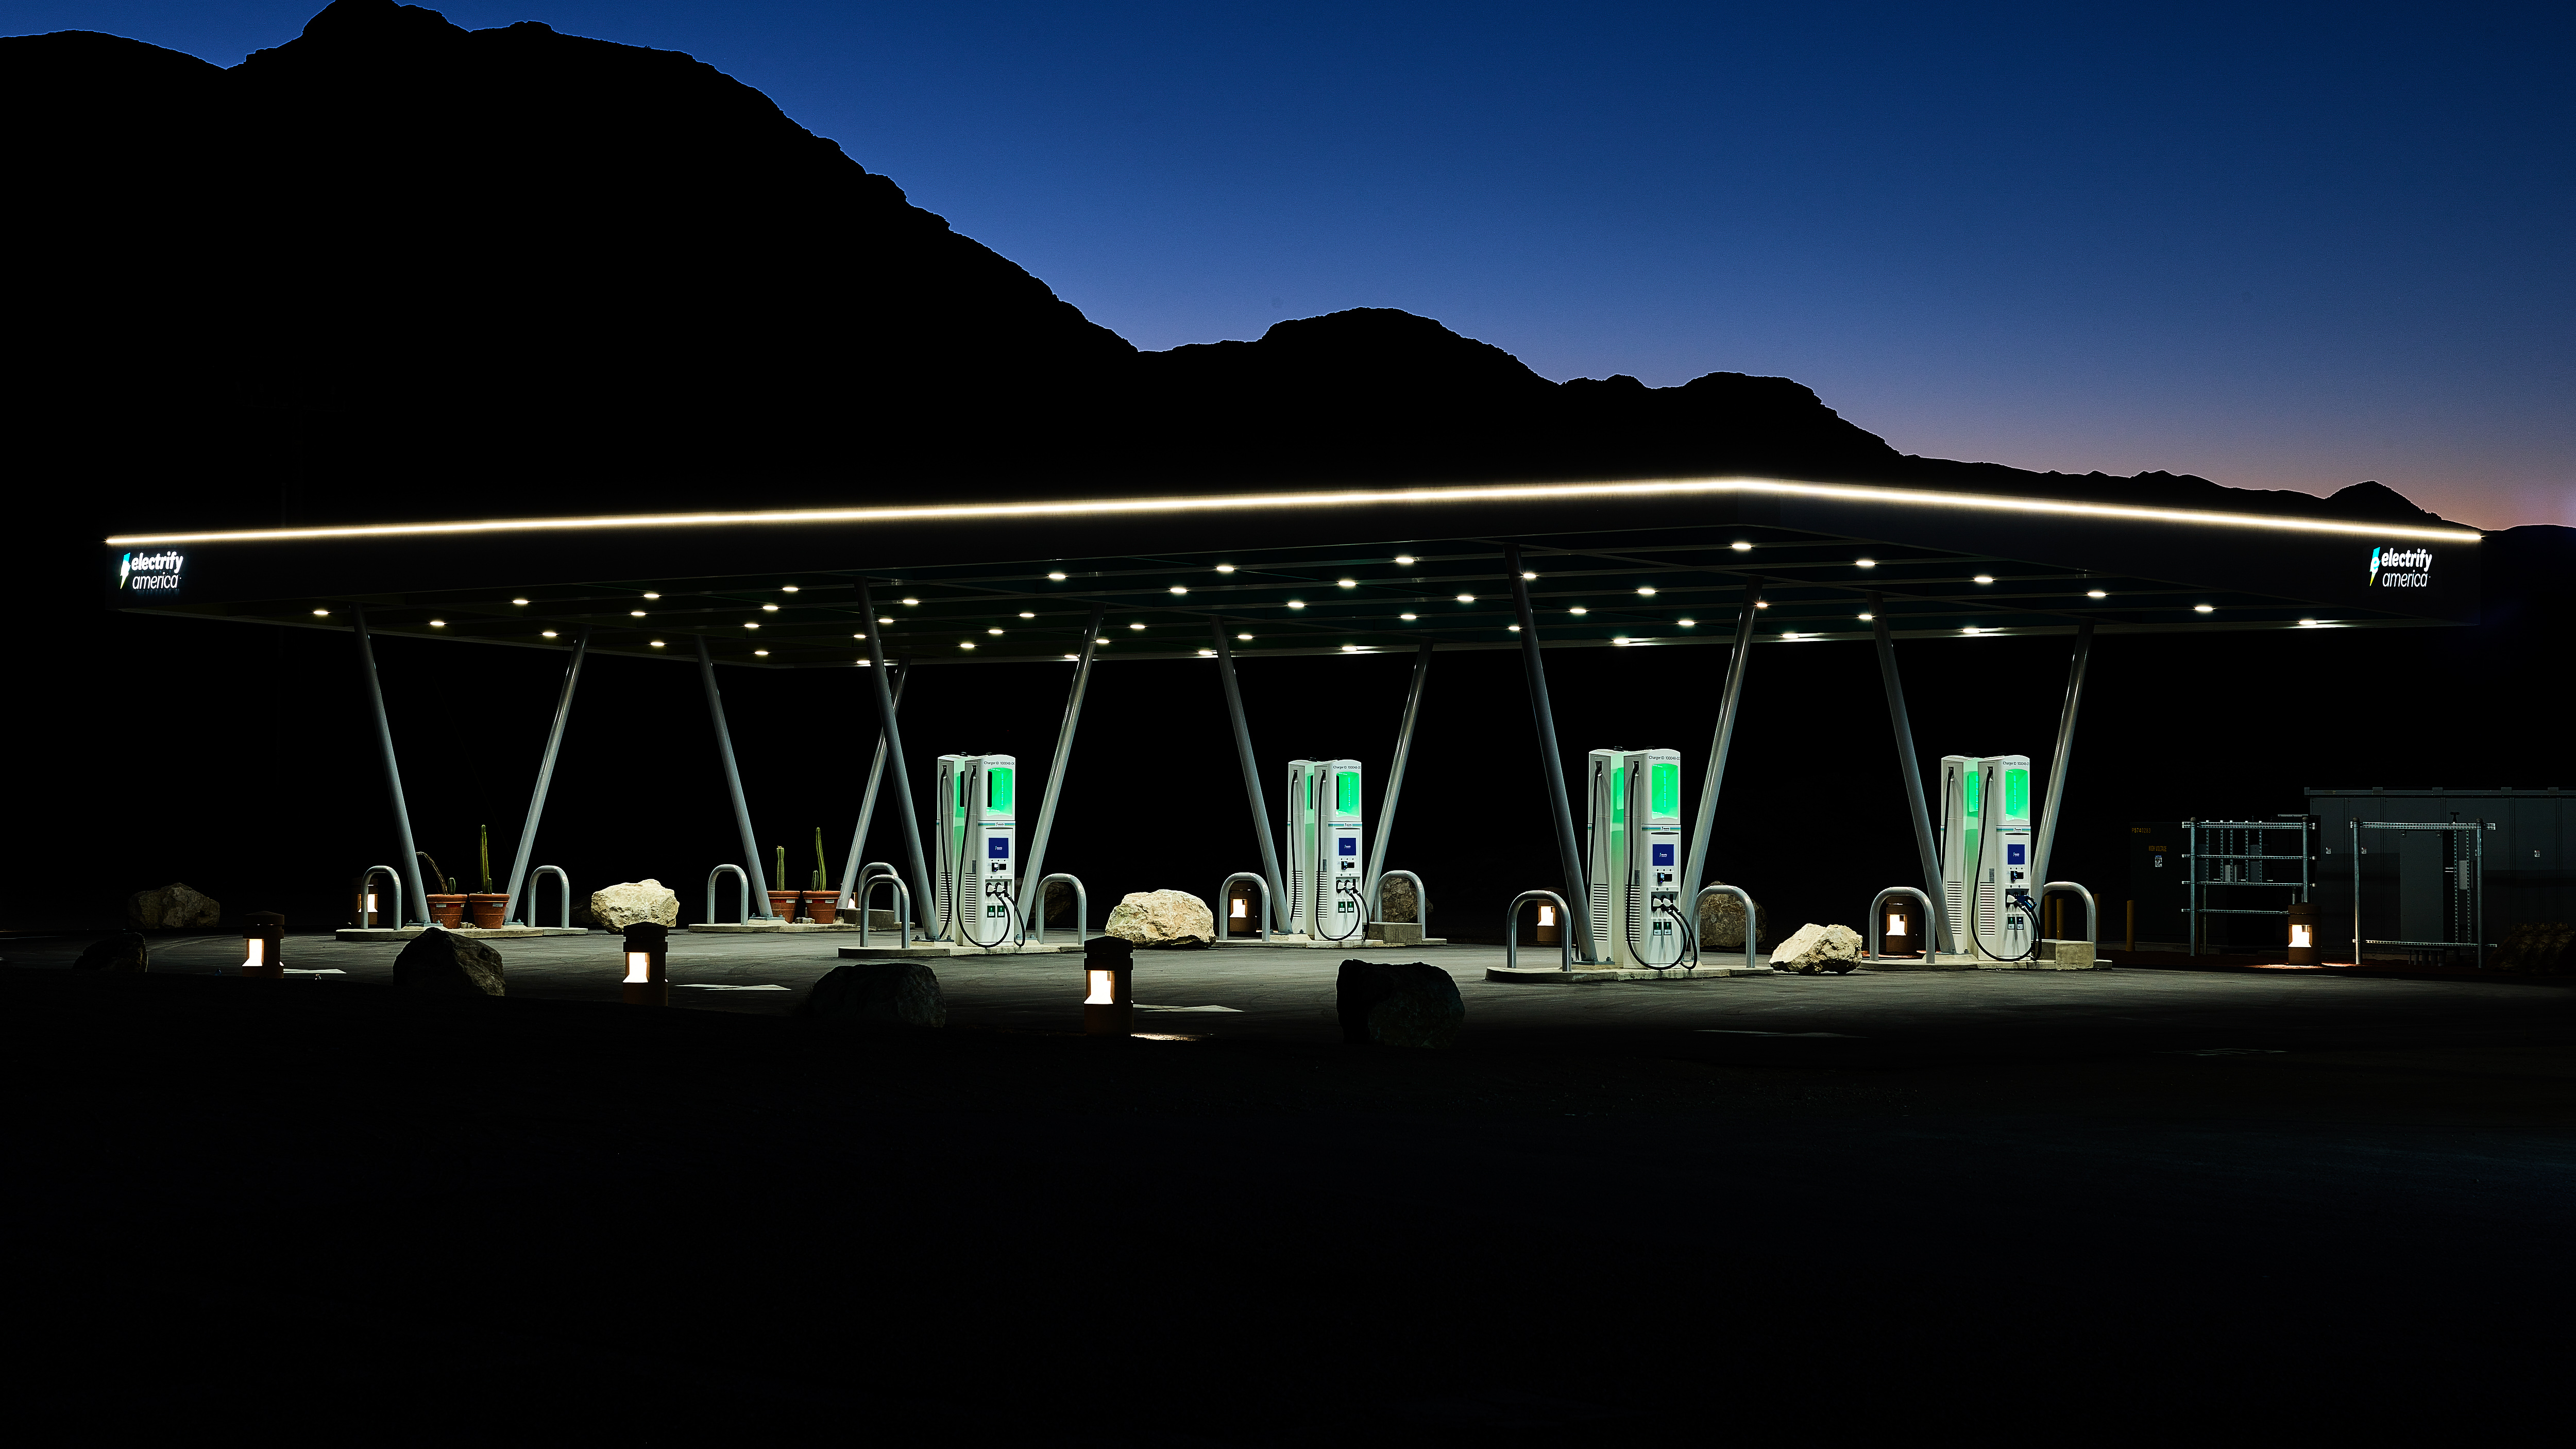 An Electrify America charging station at night